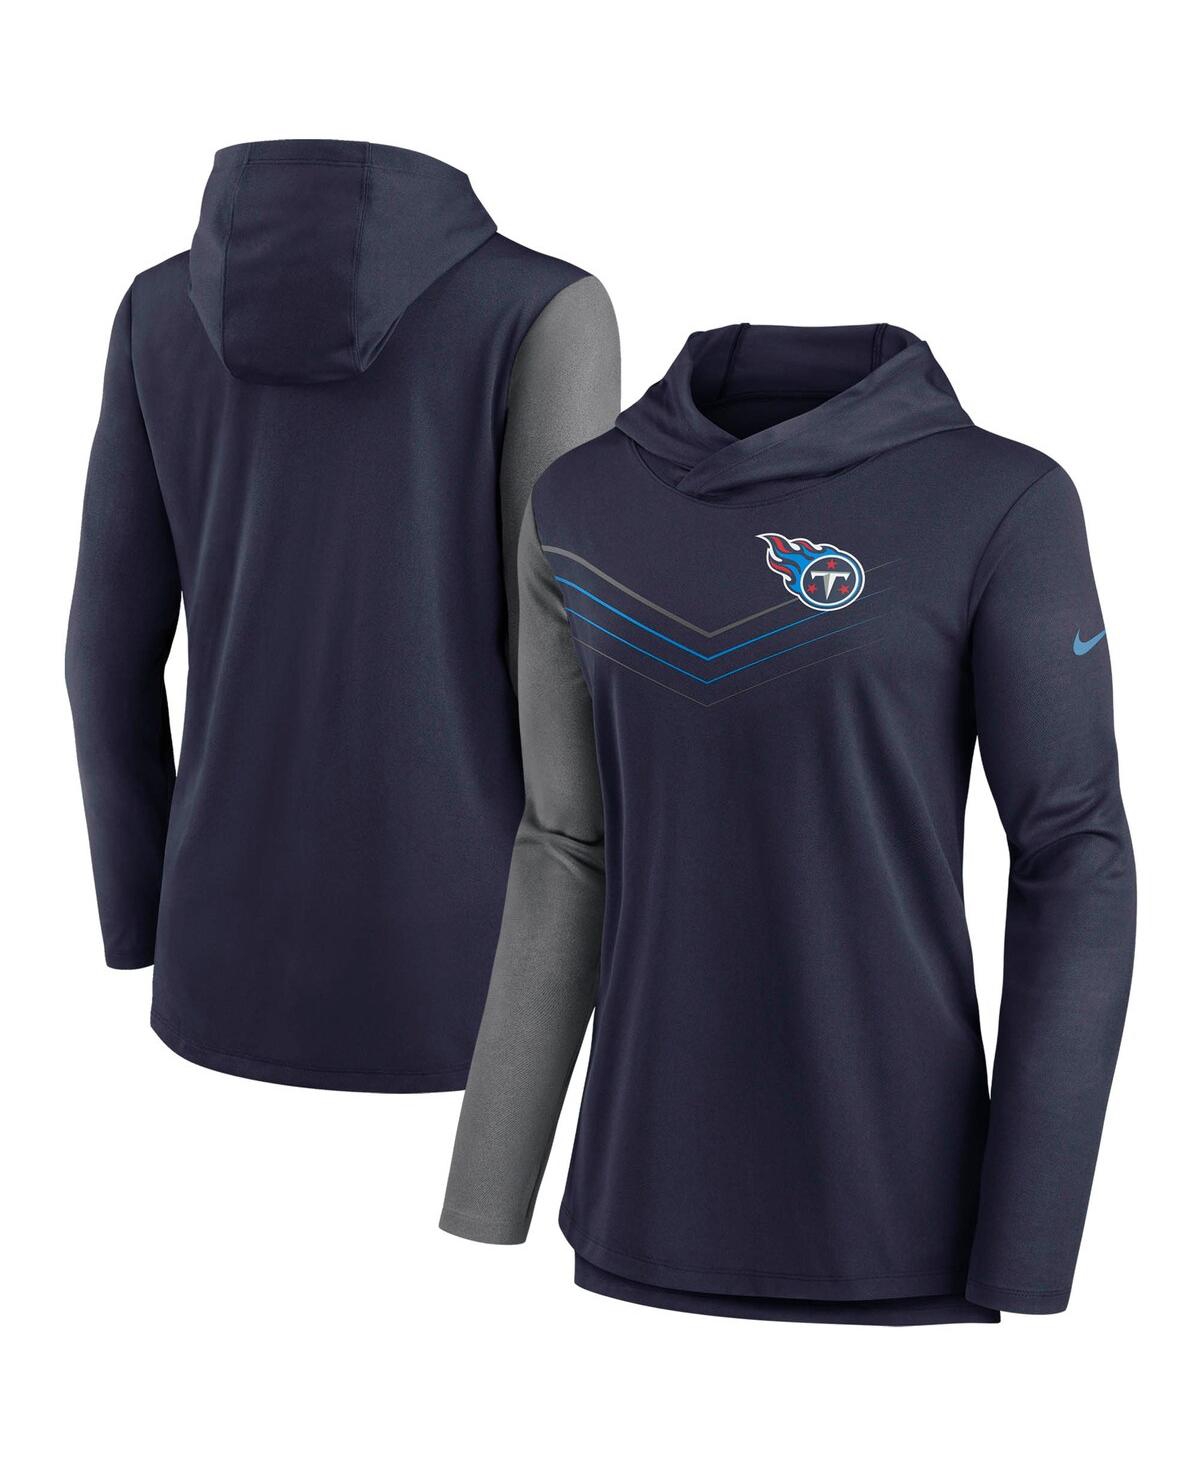 Women's Nike Navy and Heathered Charcoal Tennessee Titans Chevron Hoodie Performance Long Sleeve T-shirt - Navy, Heathered Charcoal